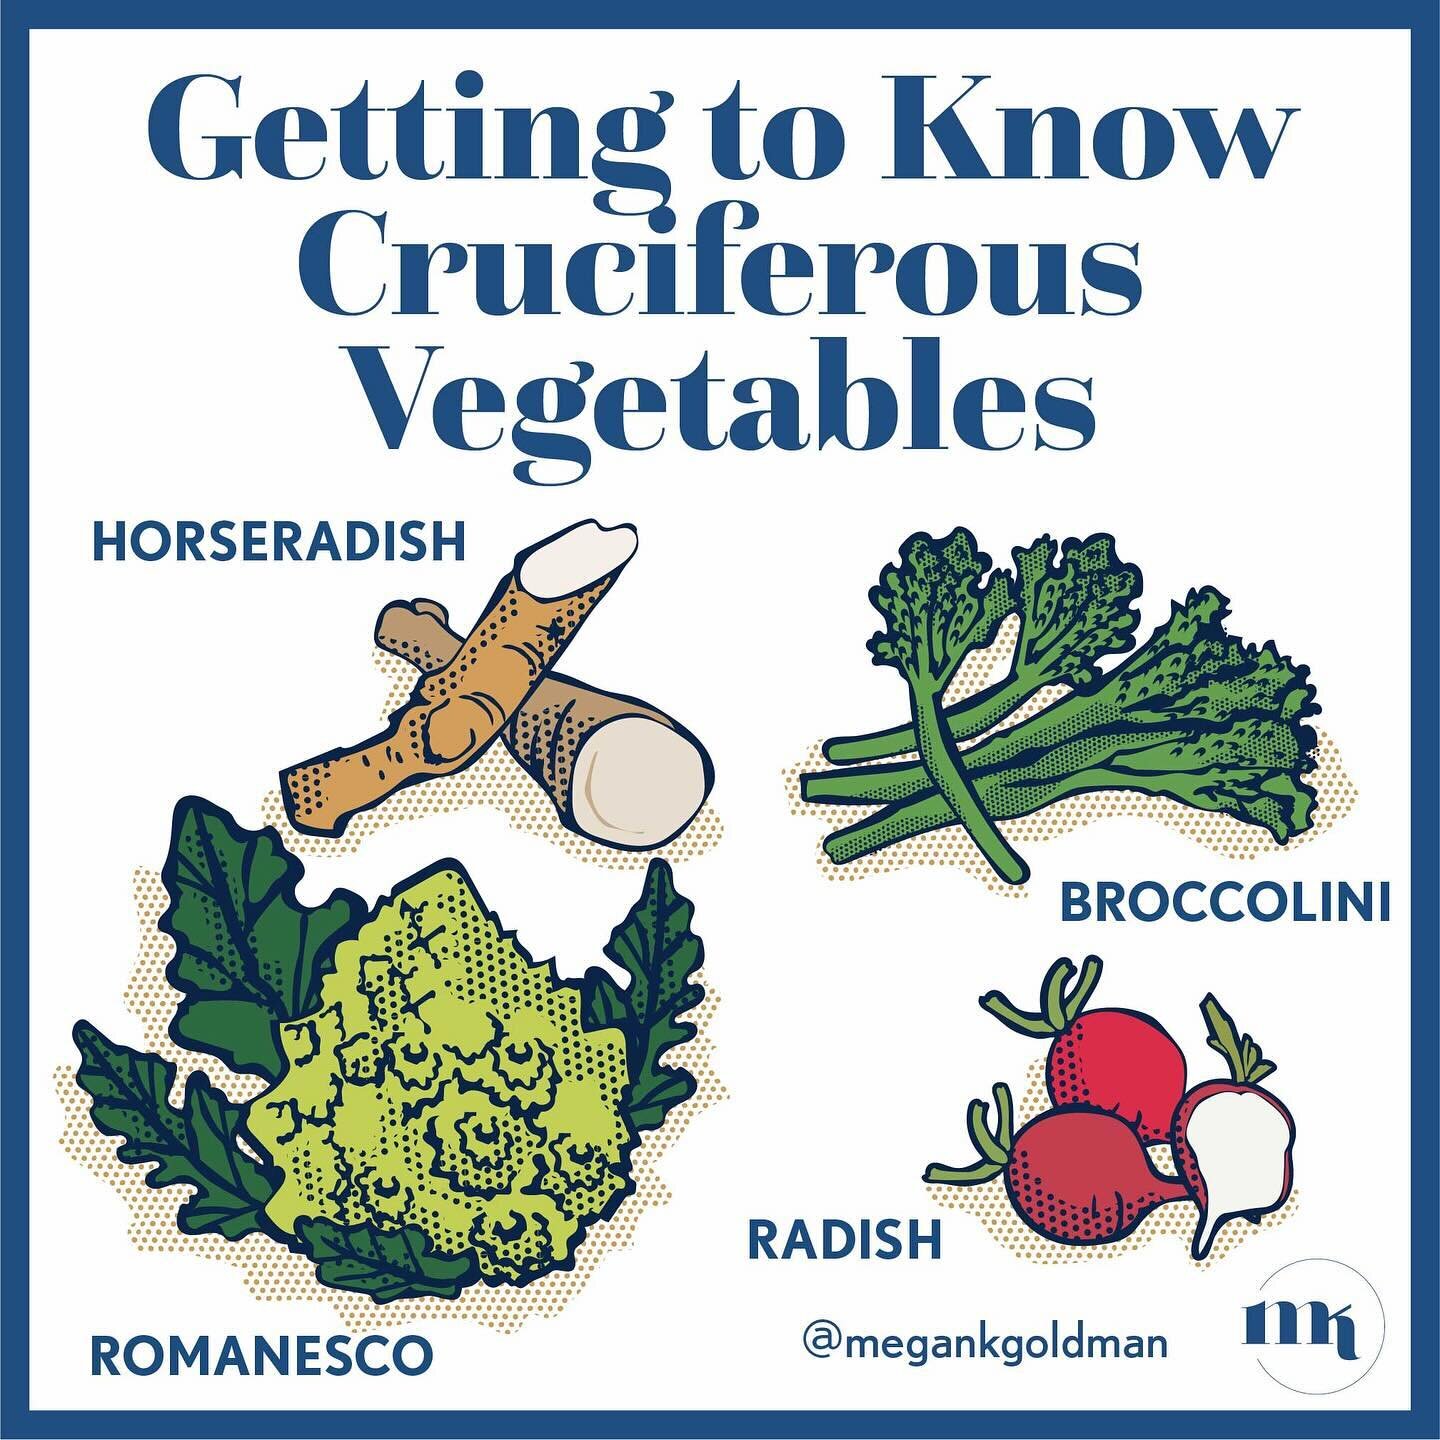 Getting to Know Cruciferous Vegetables

Hi friends! Happy Monday! Being that many of our favorite cruciferous veggies are in season I thought breakdown the different types &amp; their unique characteristics. 

Swipe through the slides to get the skin